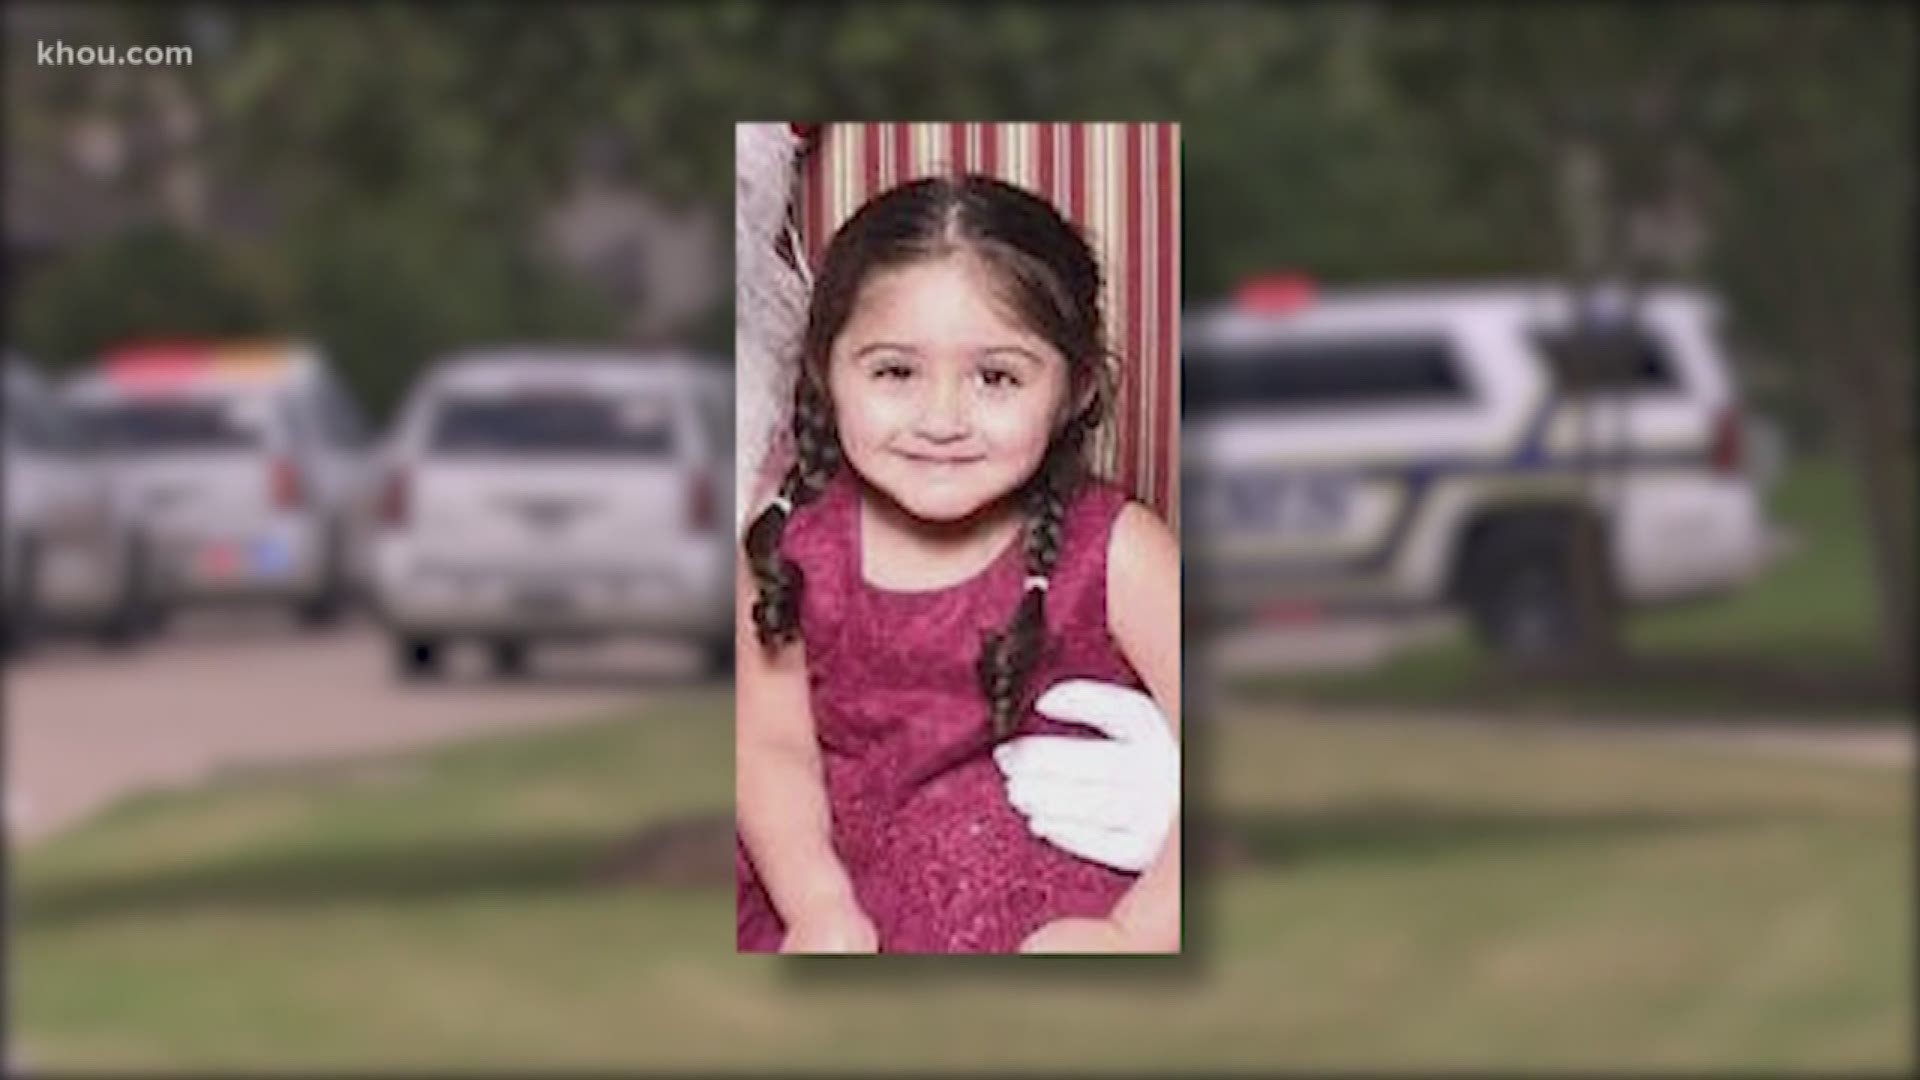 A 3-year-old girl was killed in a Fort Bend neighborhood near Sugar Land after her father's car was accidentally put in reverse and she was run over, deputies said.